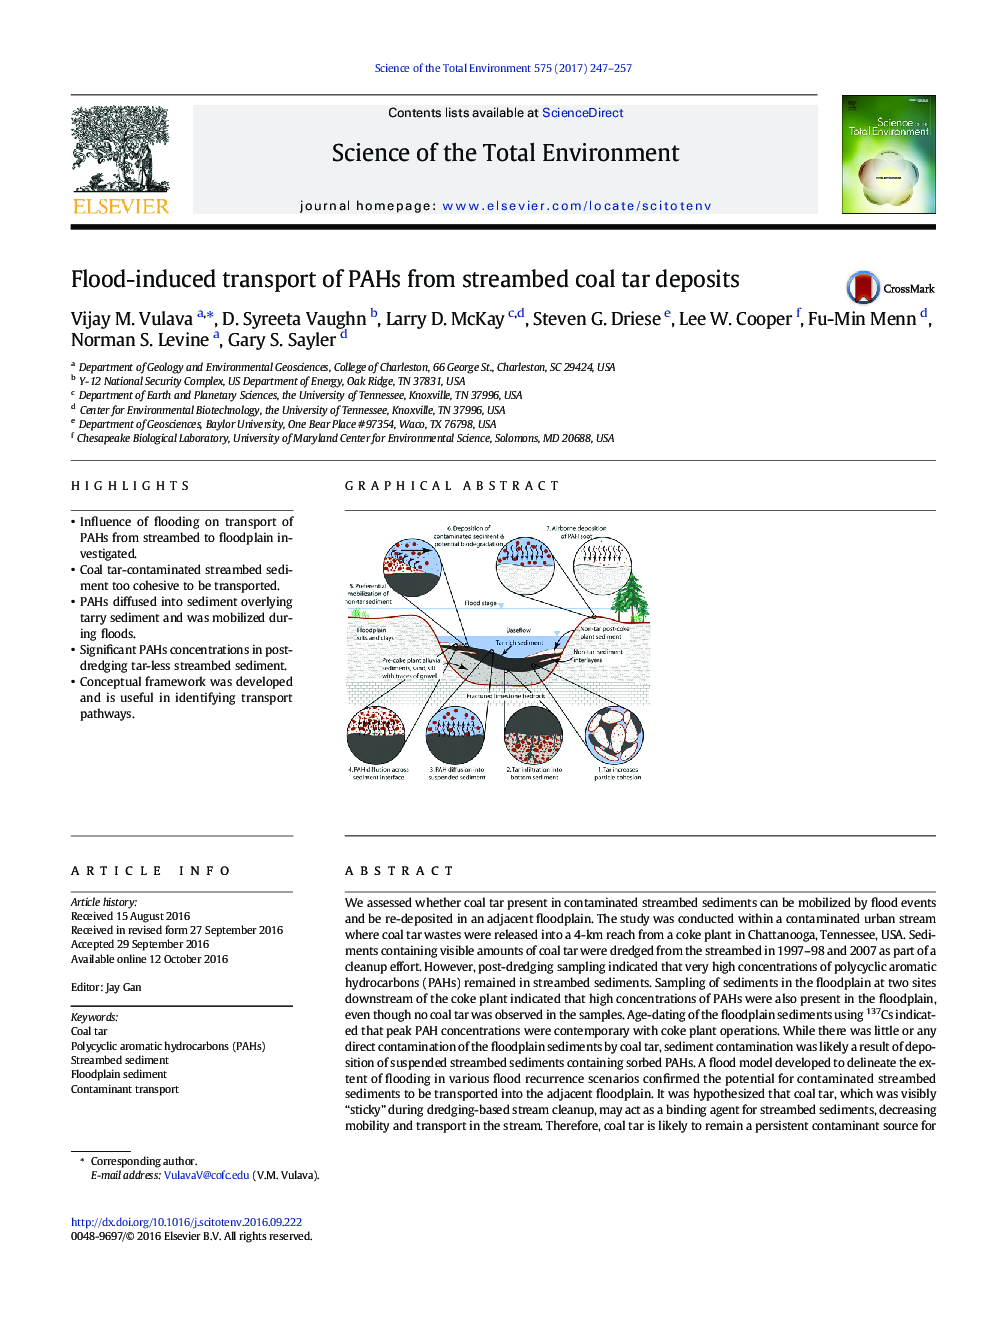 Flood-induced transport of PAHs from streambed coal tar deposits